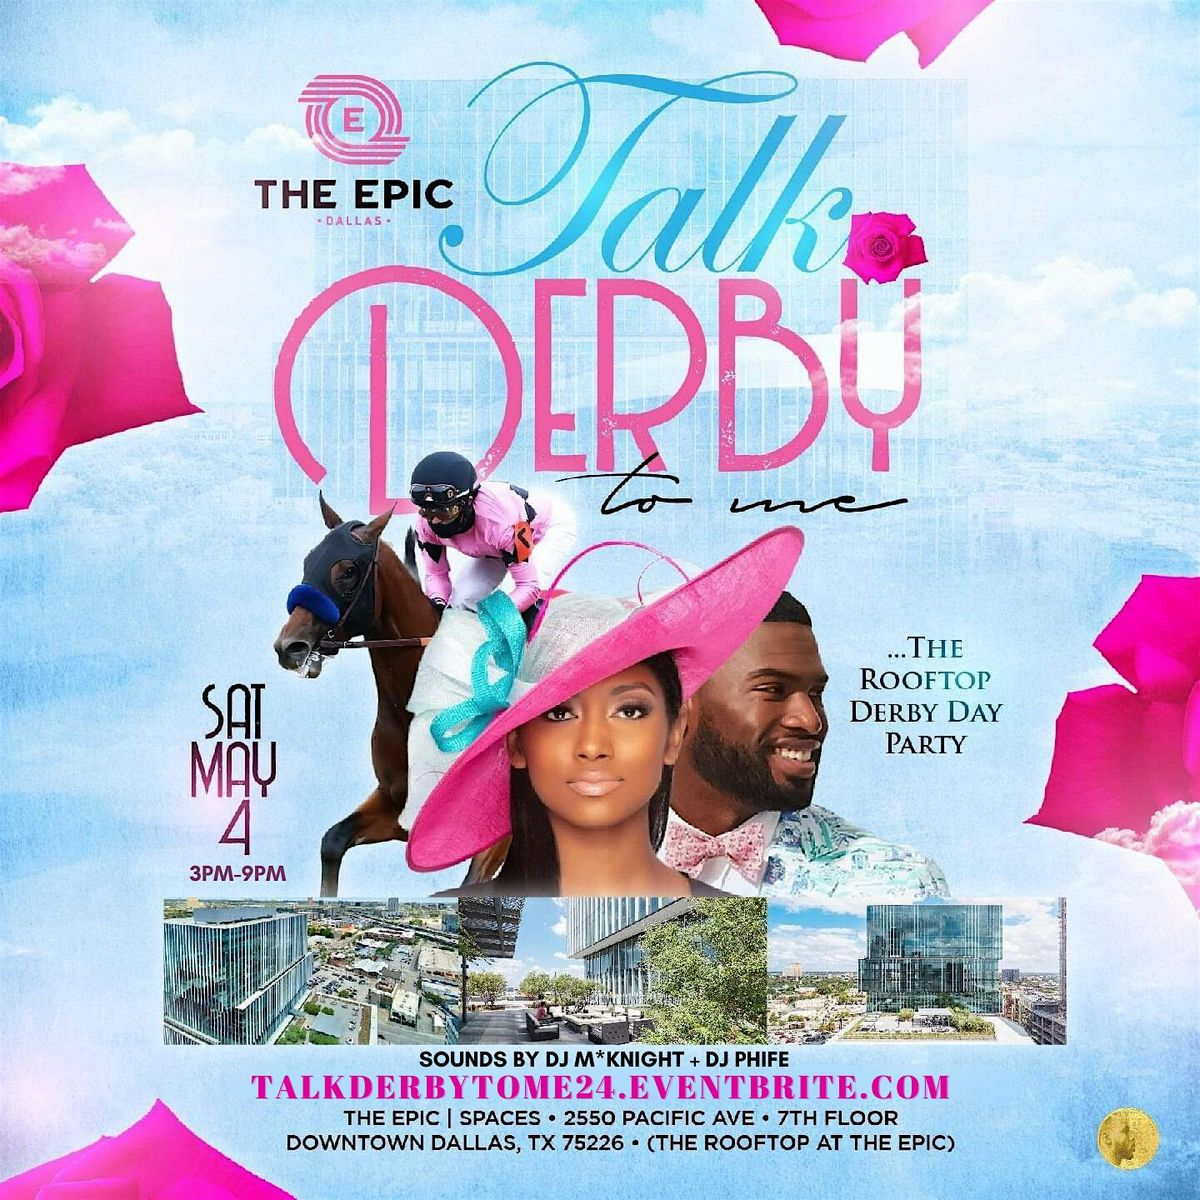 TALK DERBY TO ME: Rooftop Derby Day Party @ The EPIC | SPACES \u2022 7th Floor